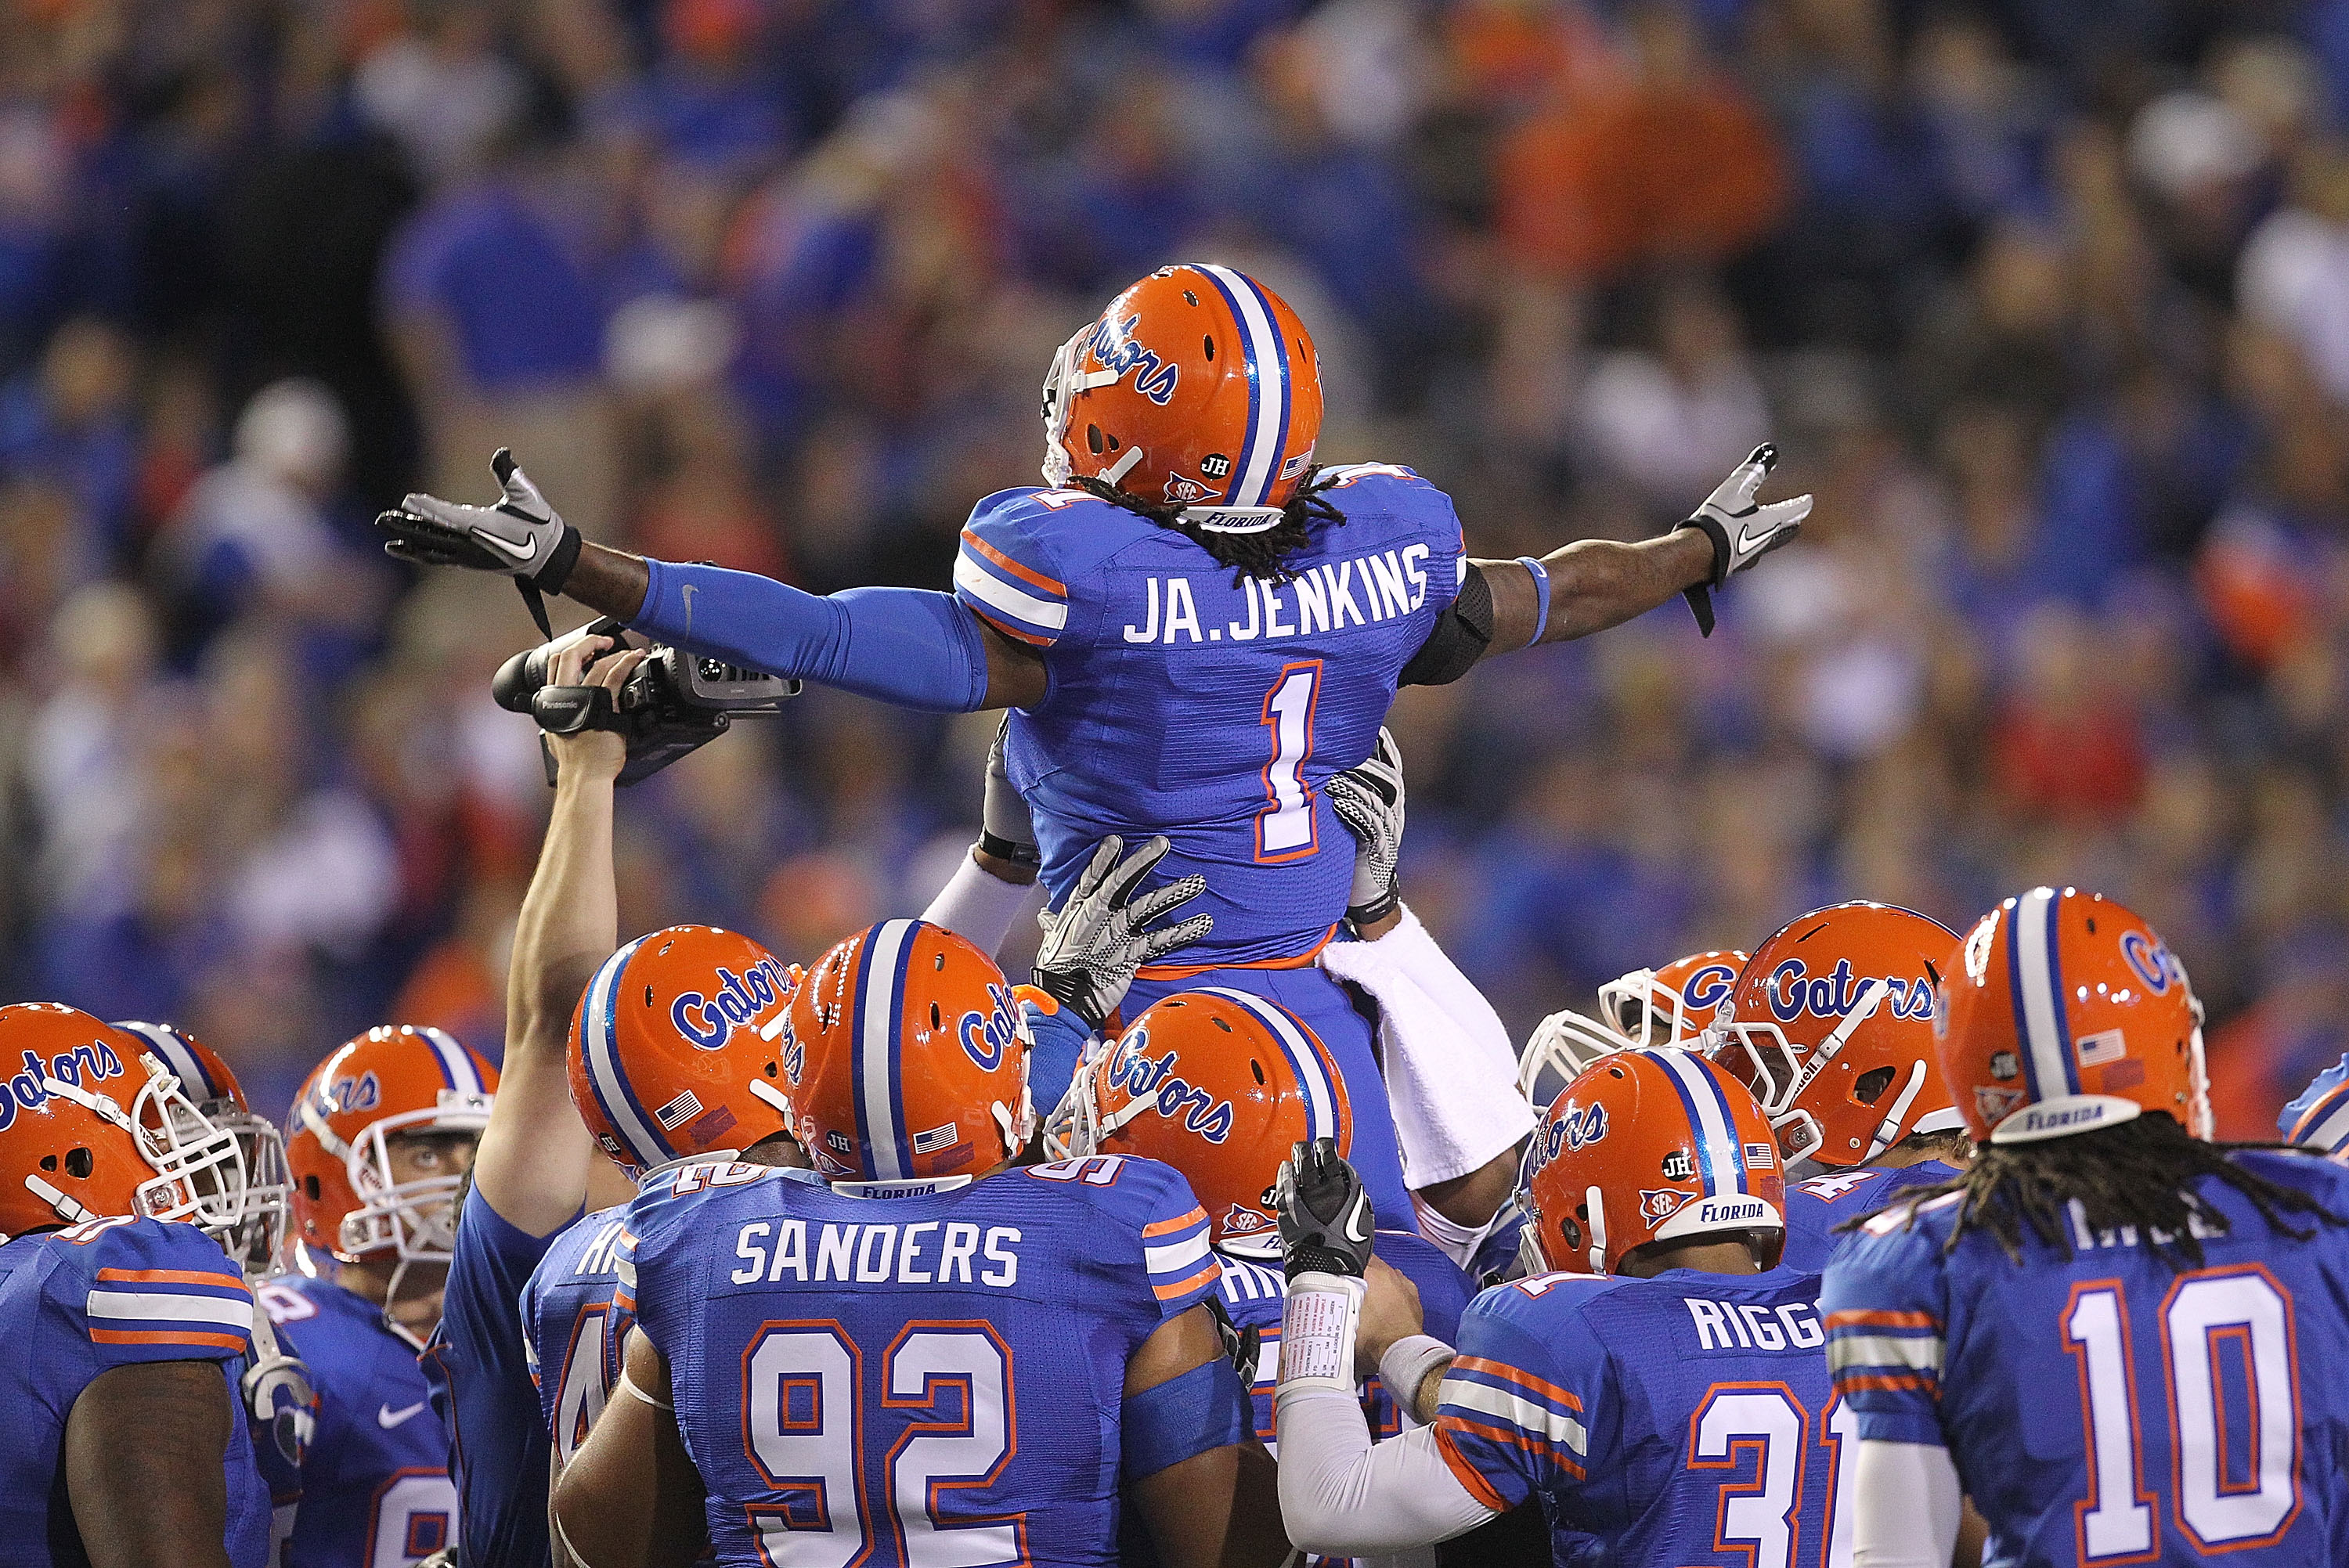 College Football Bowl Projections 5 Likely Destinations for Florida